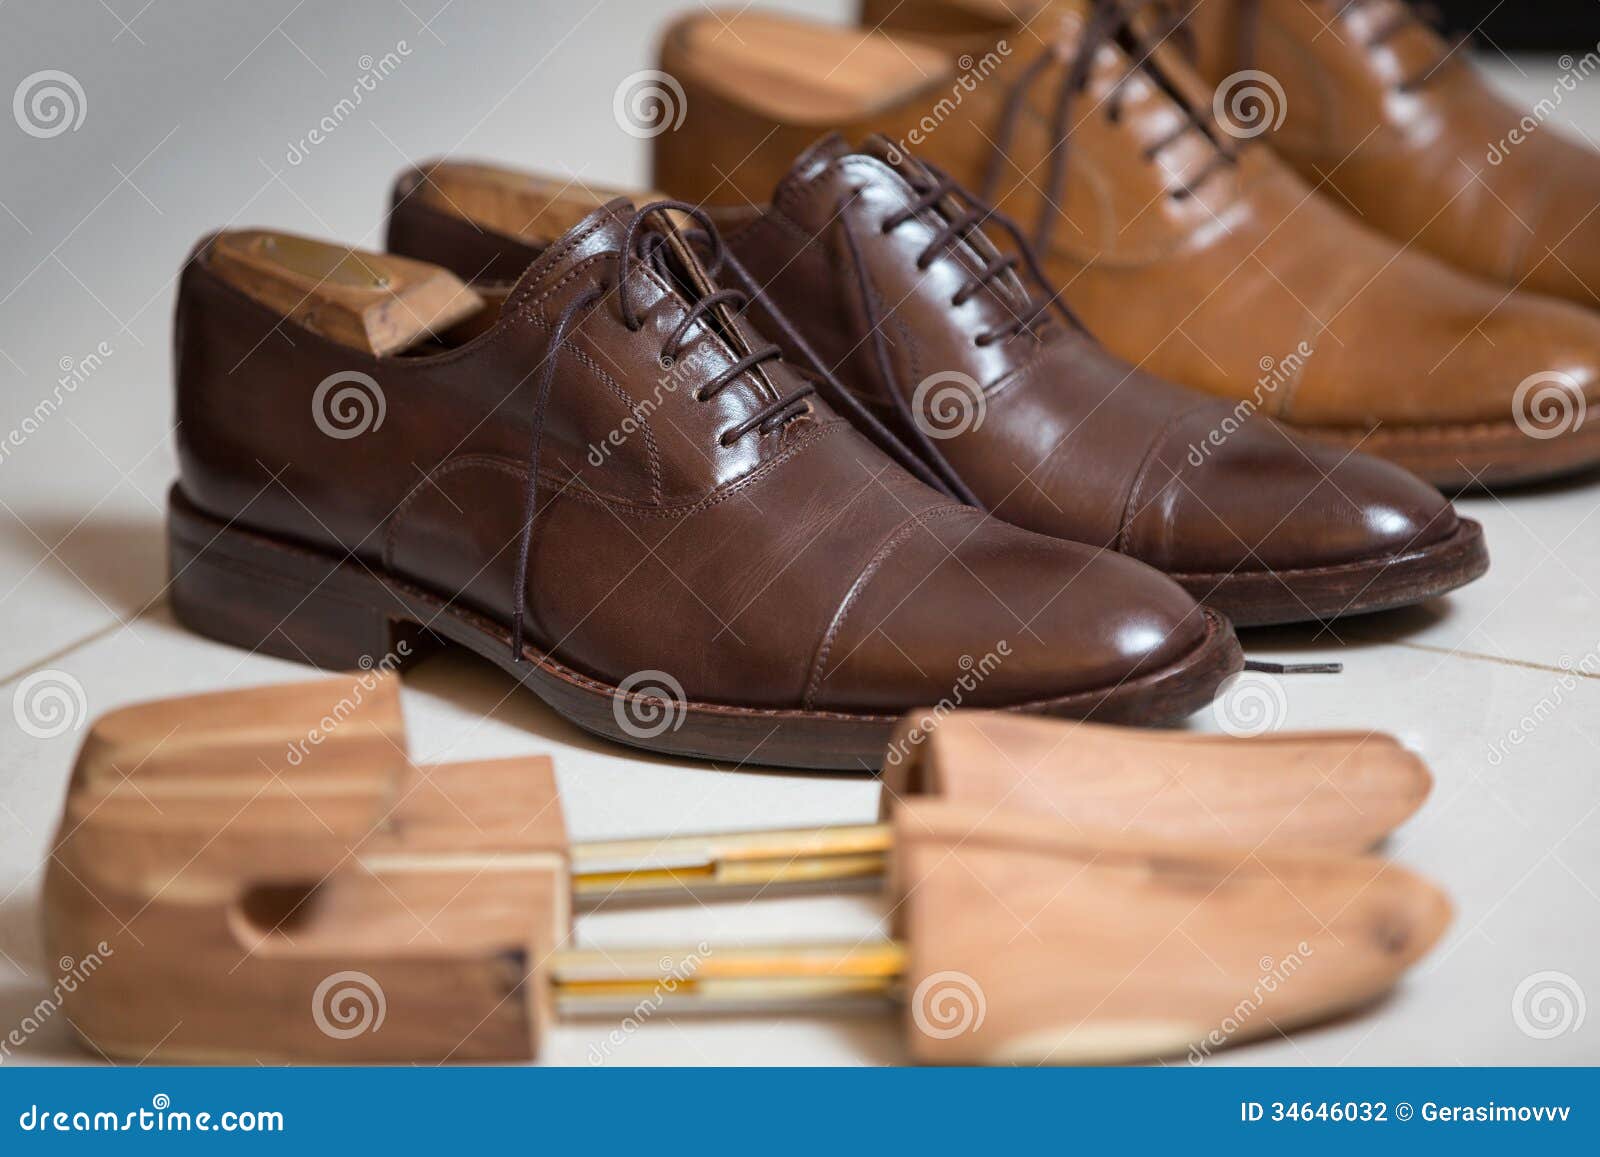 Brown Men S Shoes and Shoe Stratchers Stock Photo - Image of object ...